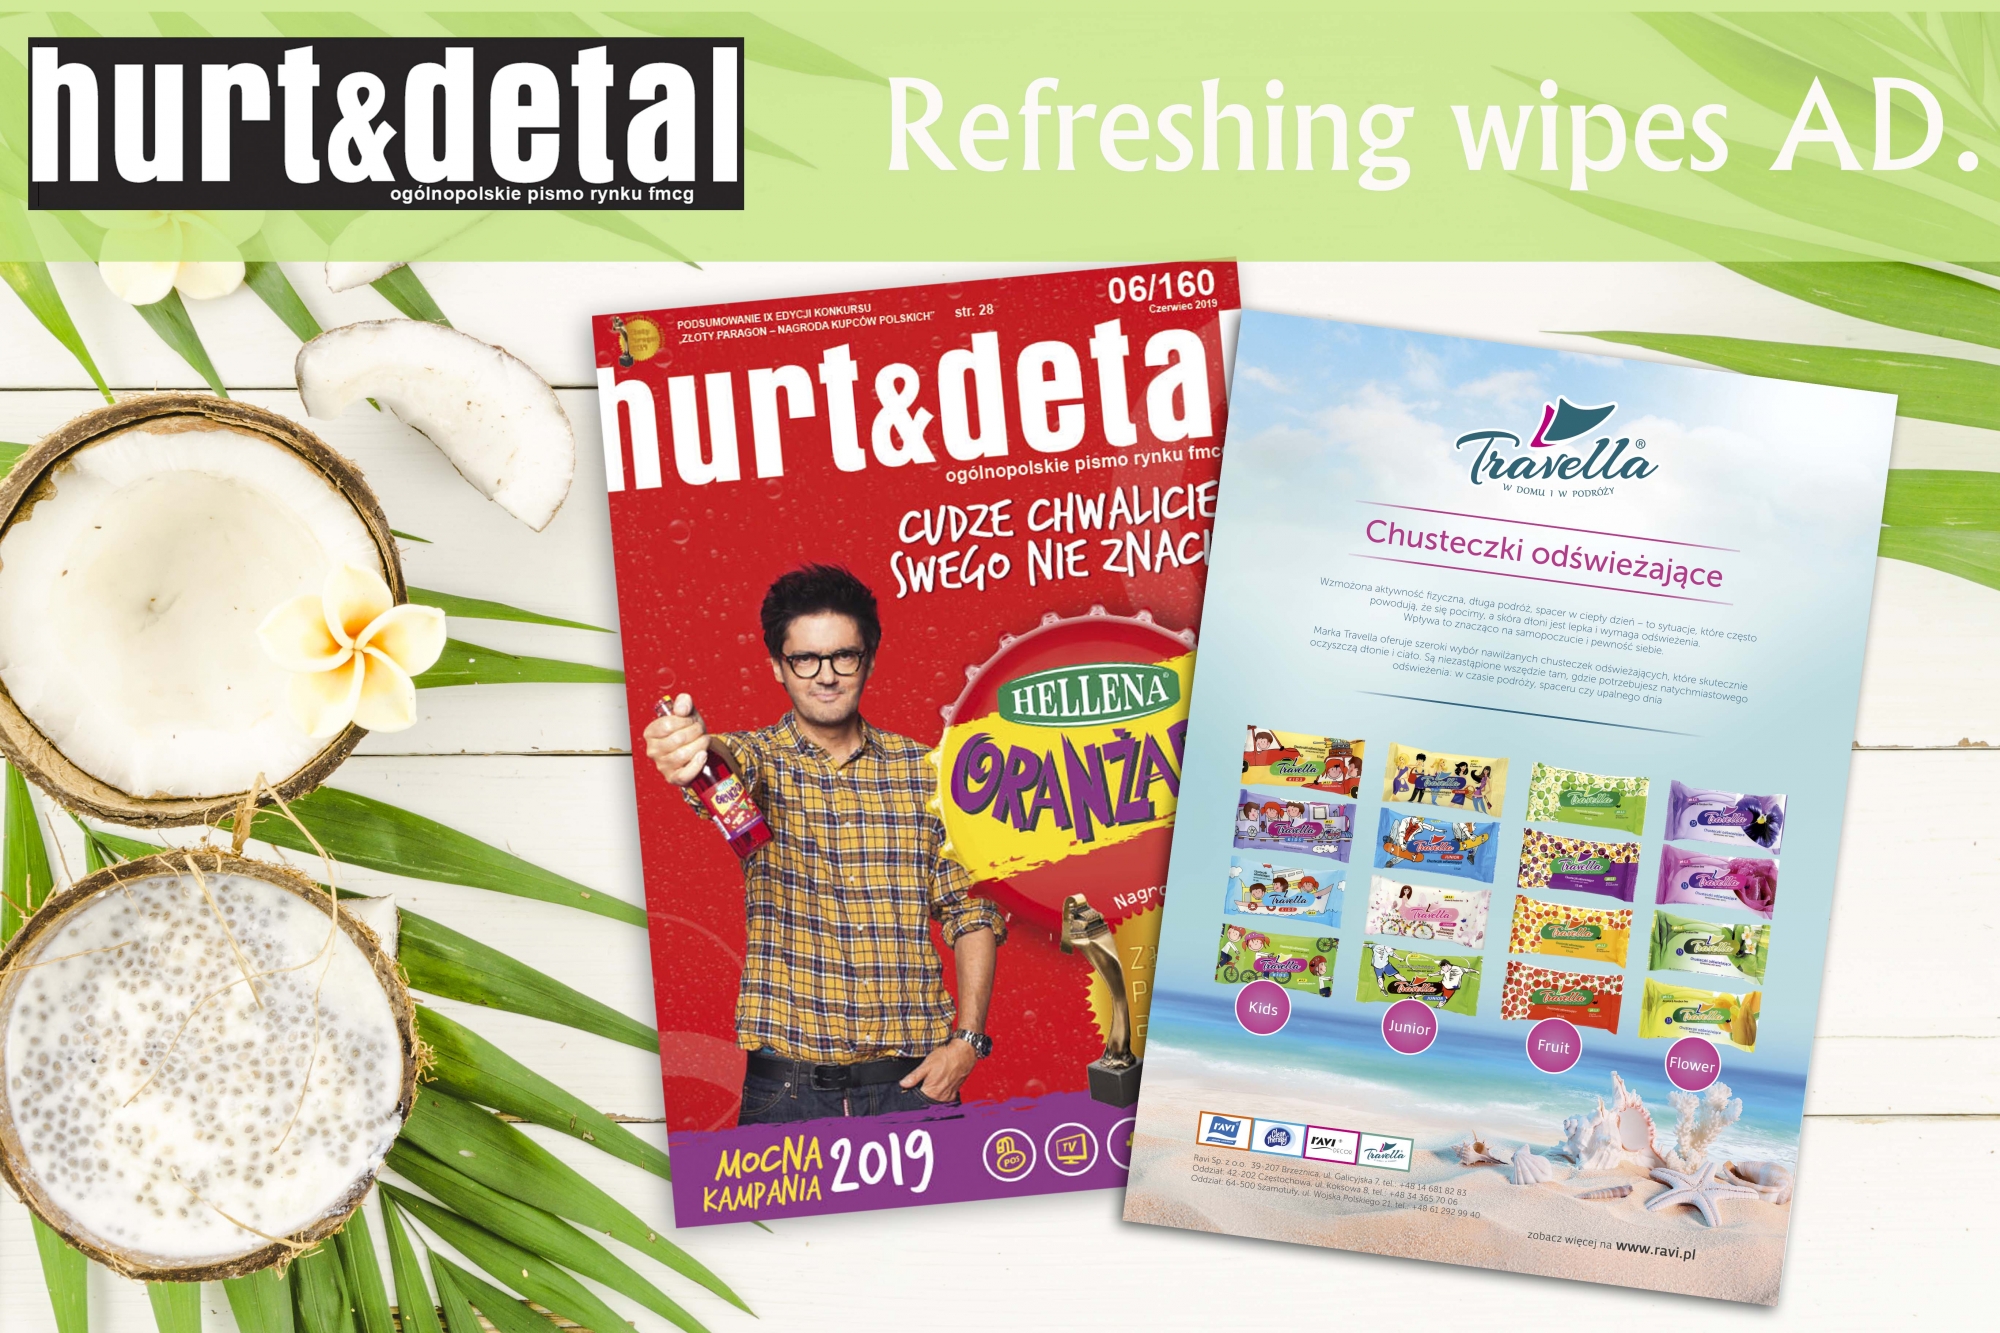 June 2019 Refreshing wipes ad.